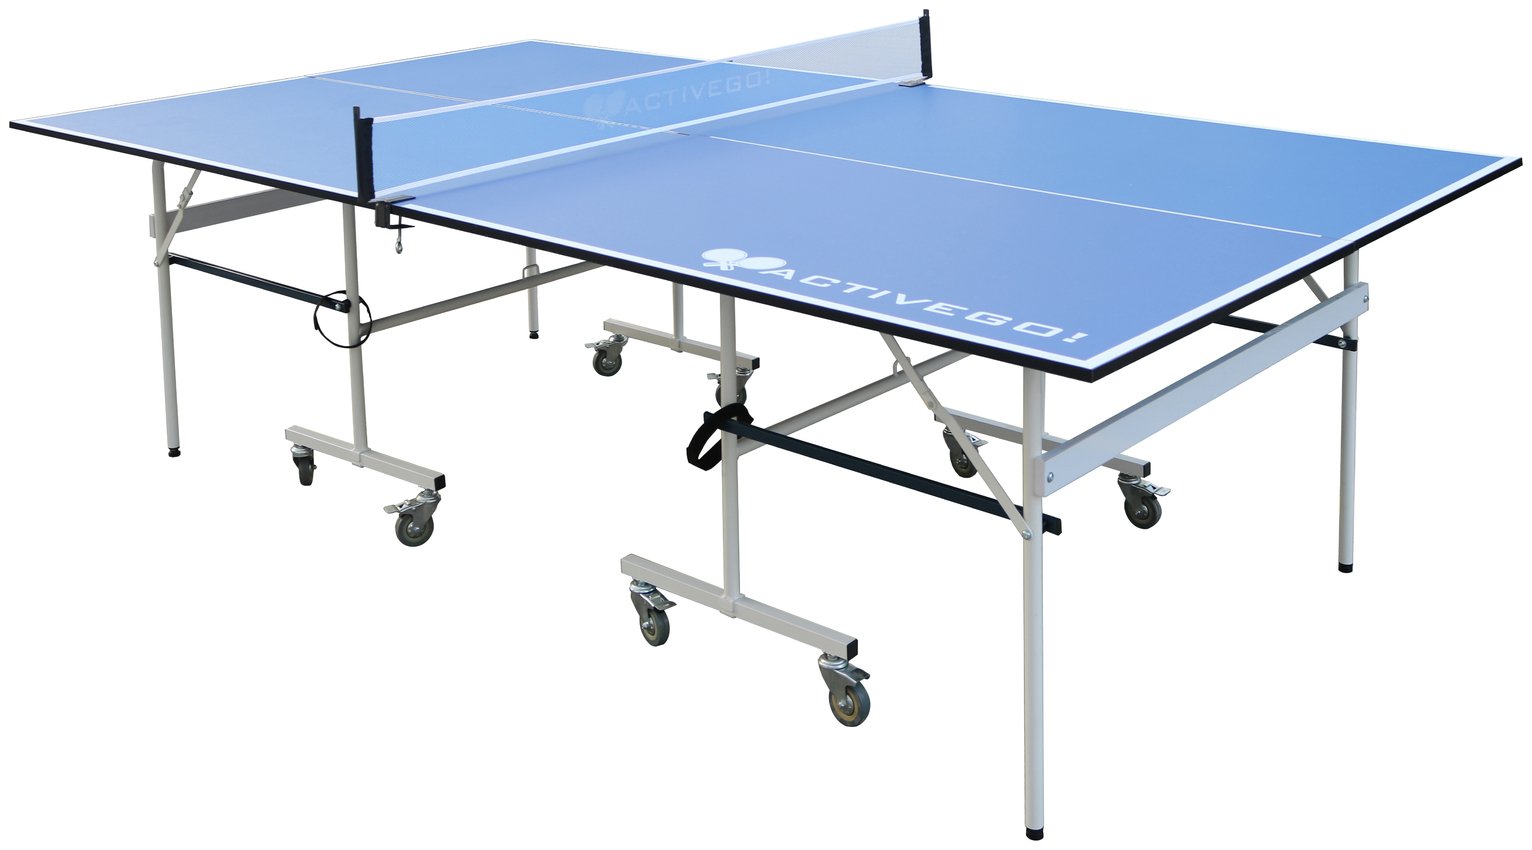 Activego 9ft Indoor Folding Table Tennis Table